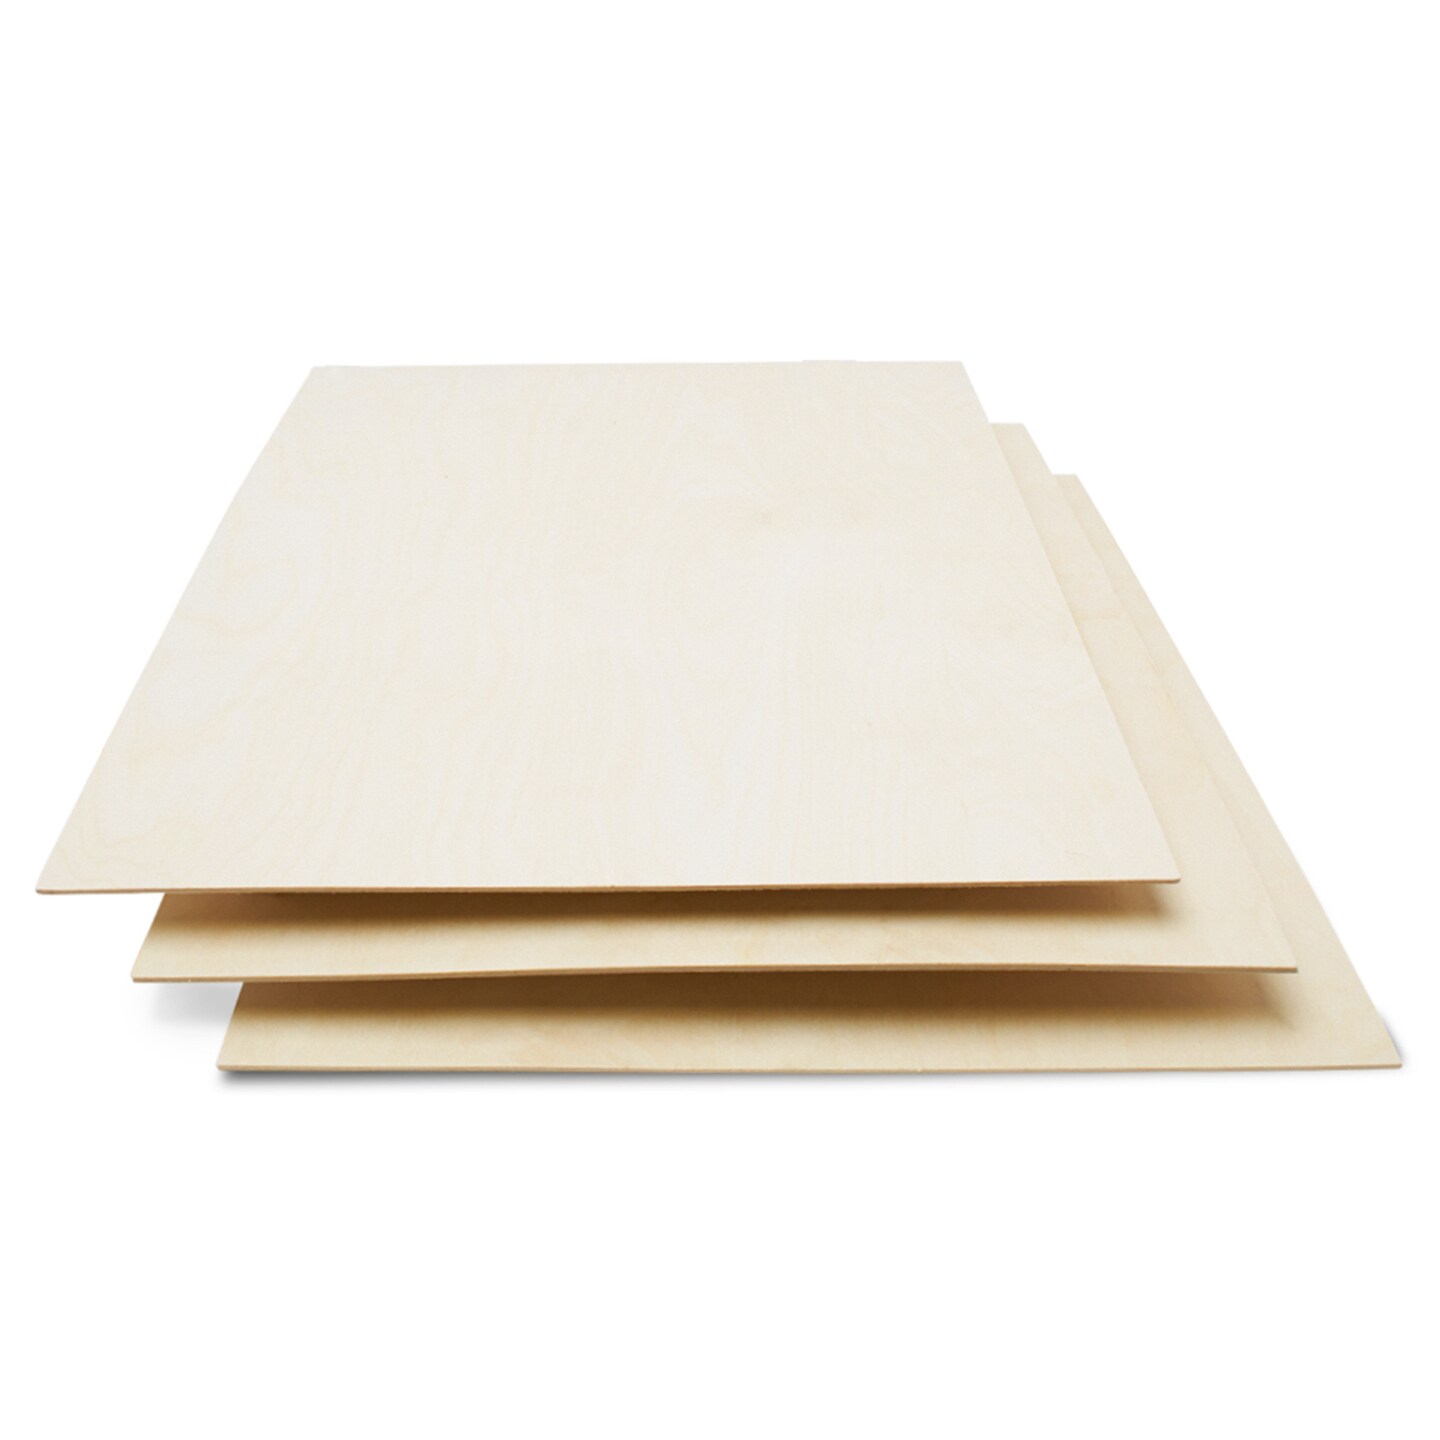 Baltic Birch Plywood, 18 x 24 Inch, B/BB Grade Sheets, 1/4 or 1/8 Inch  Thick, Woodpeckers